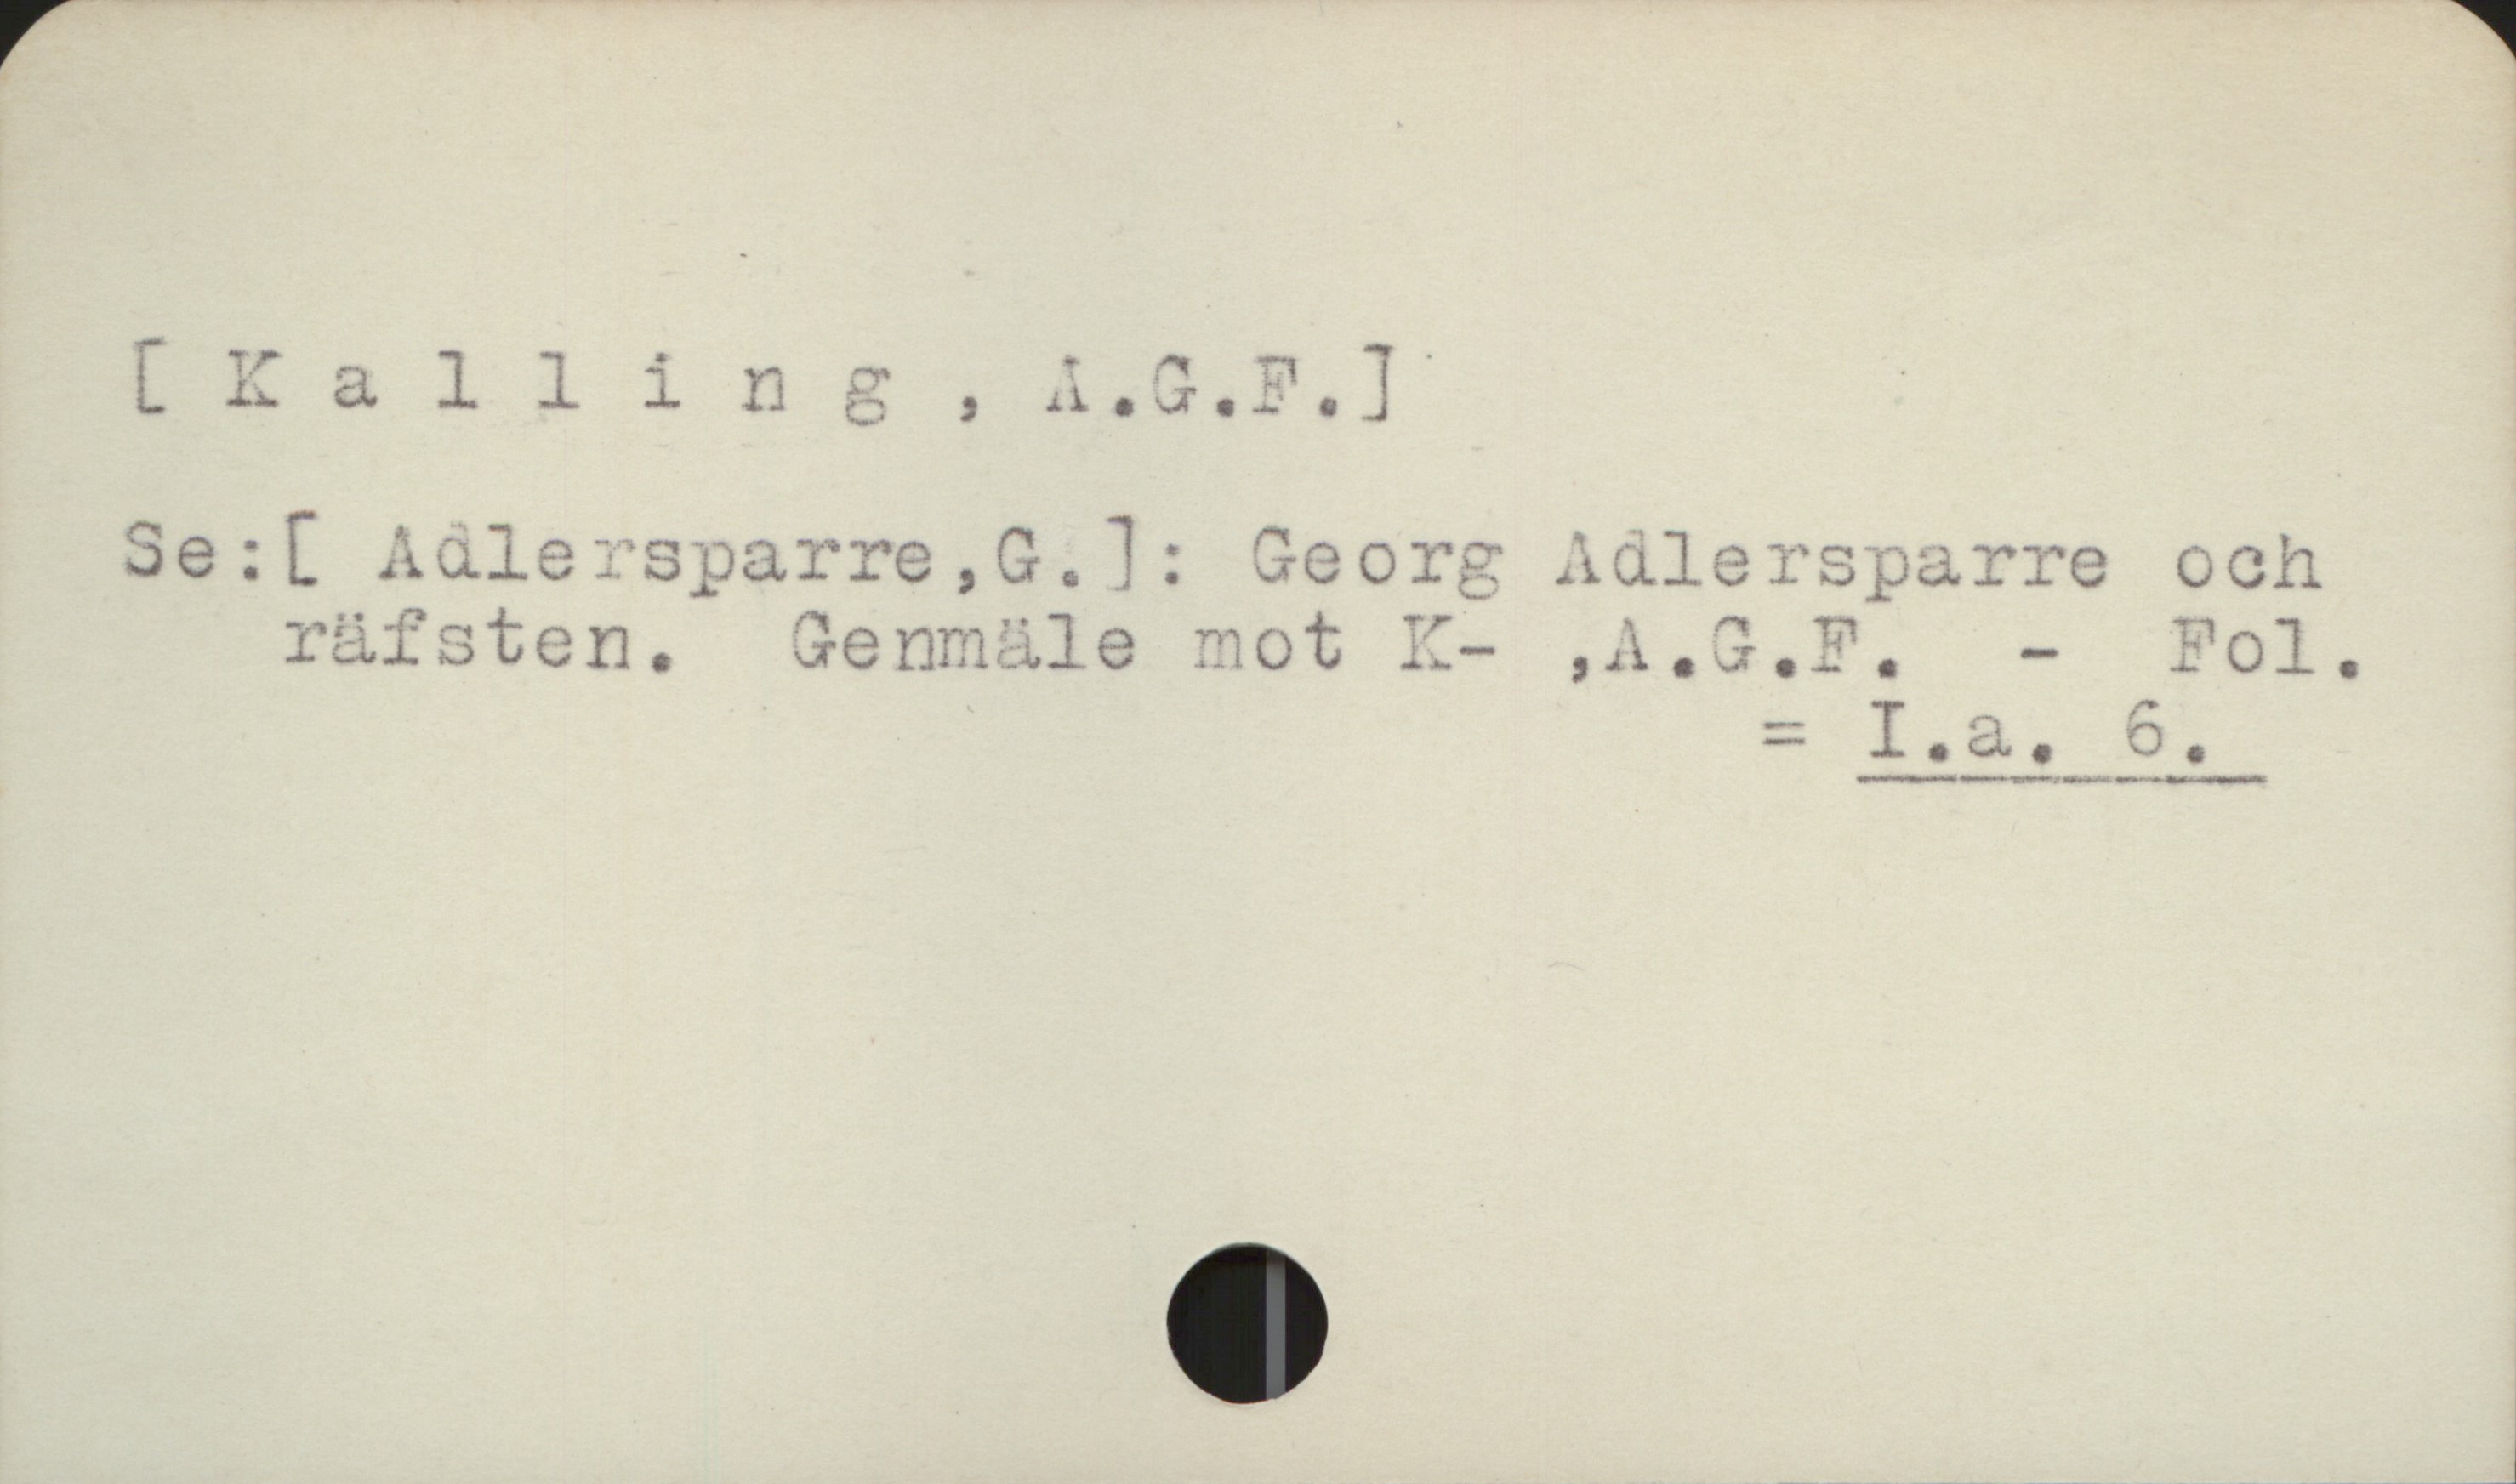  Se :[ Aale-sparre,G.l];: Georg Adlersparre och
CGenmäle mot I- ,A.,.7.", - "ol.
= I.a, S.

